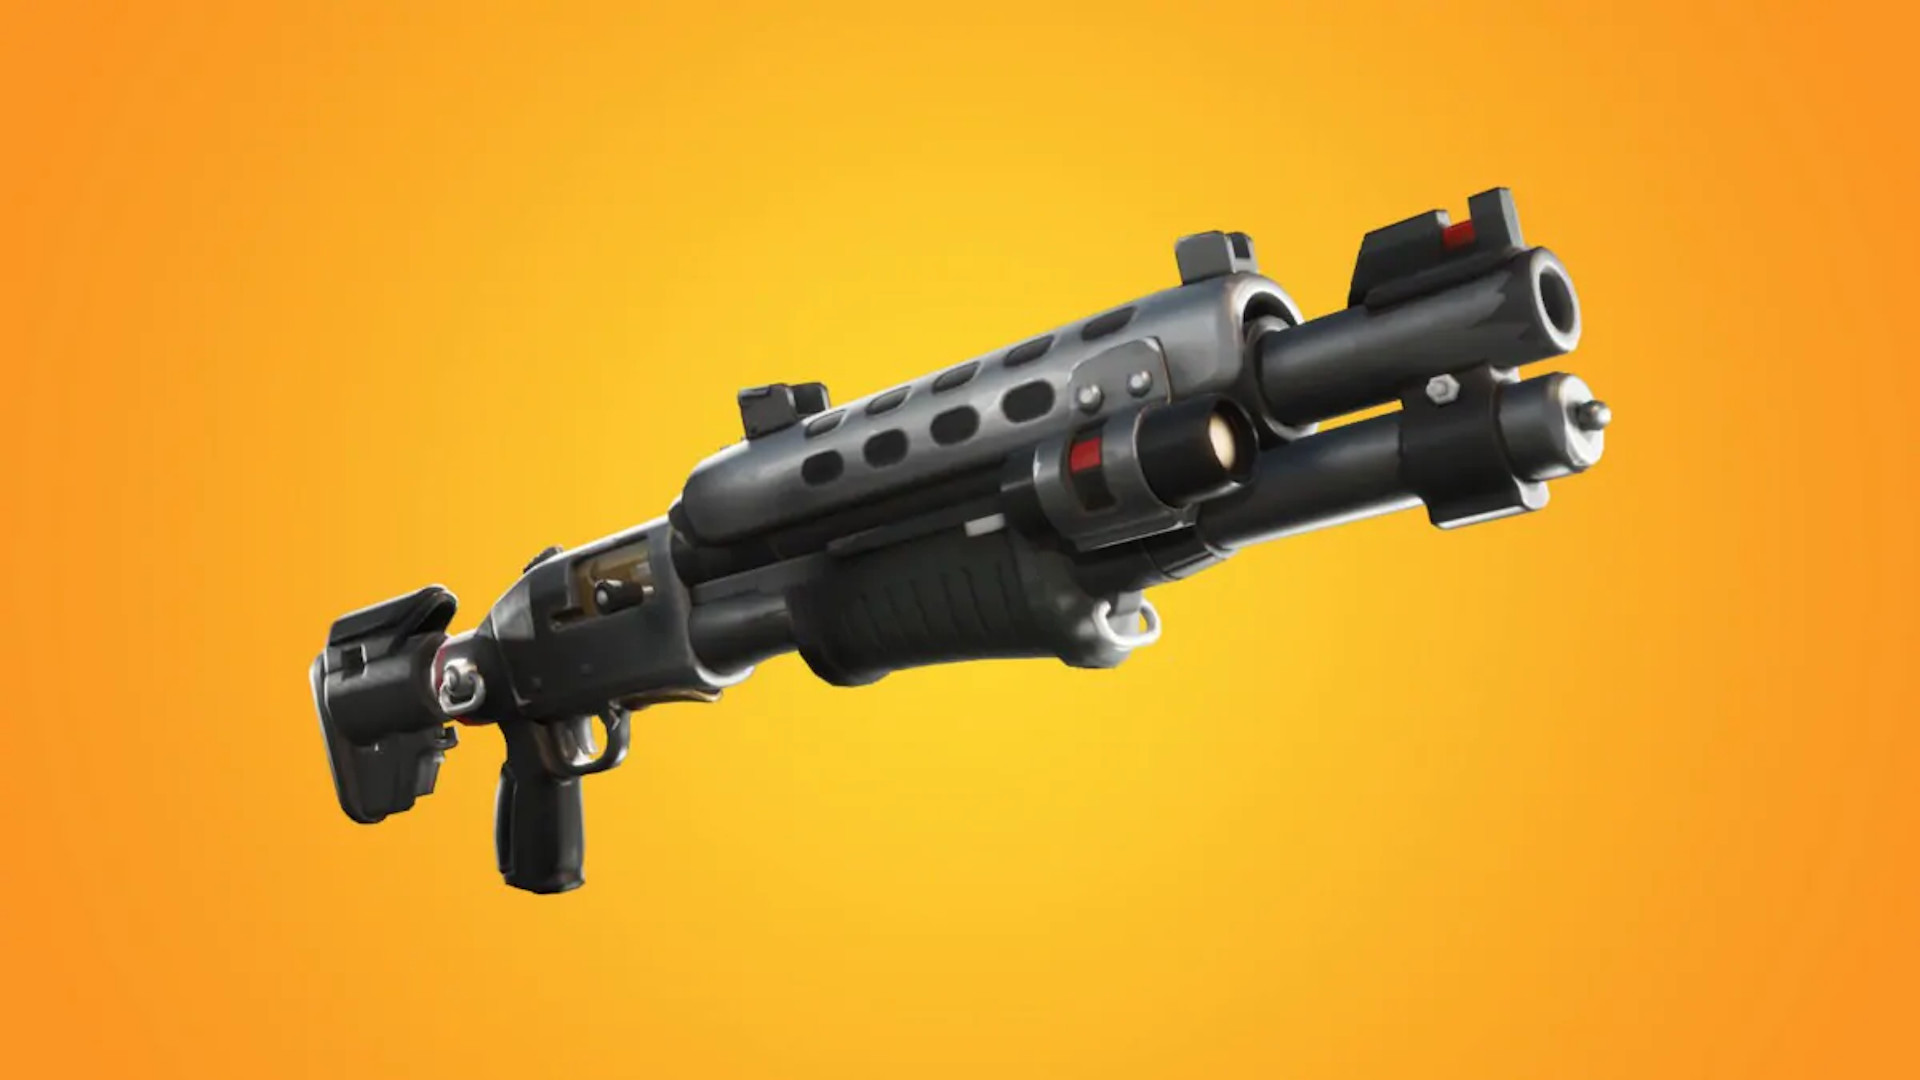 Long Range Guns In Fortnite Fortnite Chapter 2 Season 7 Tier List The Best Weapons And How To Craft Them The Loadout